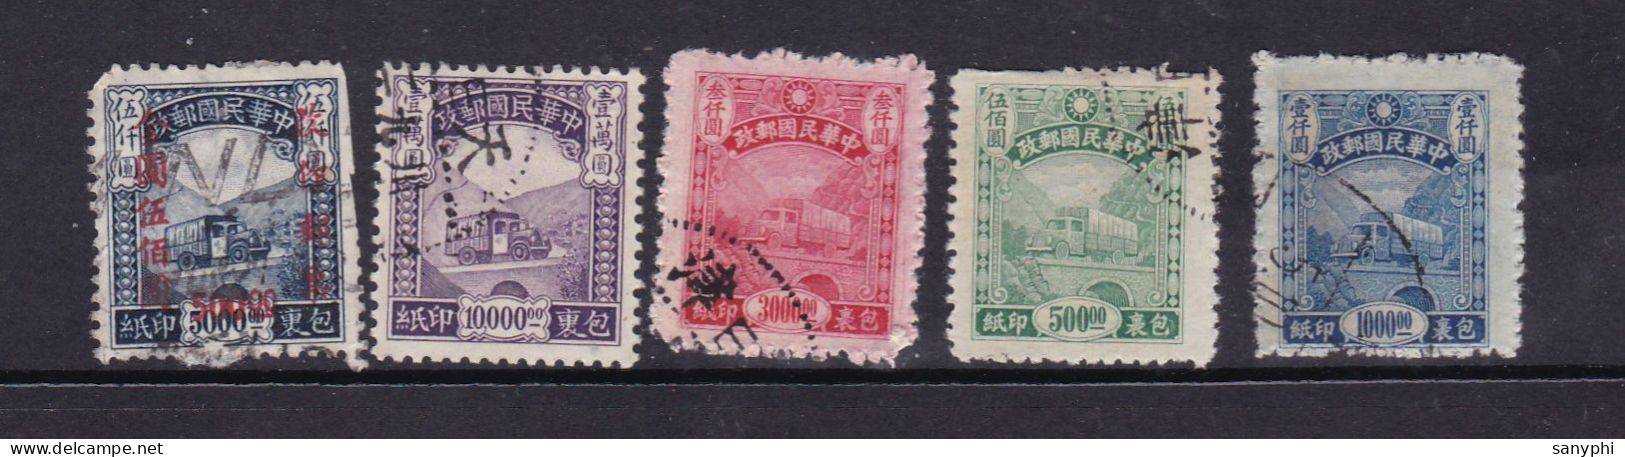 China Chine 1934-37 Parcel Post Stamps 5 Used Stamps ,not Complete Set - 1912-1949 Republic